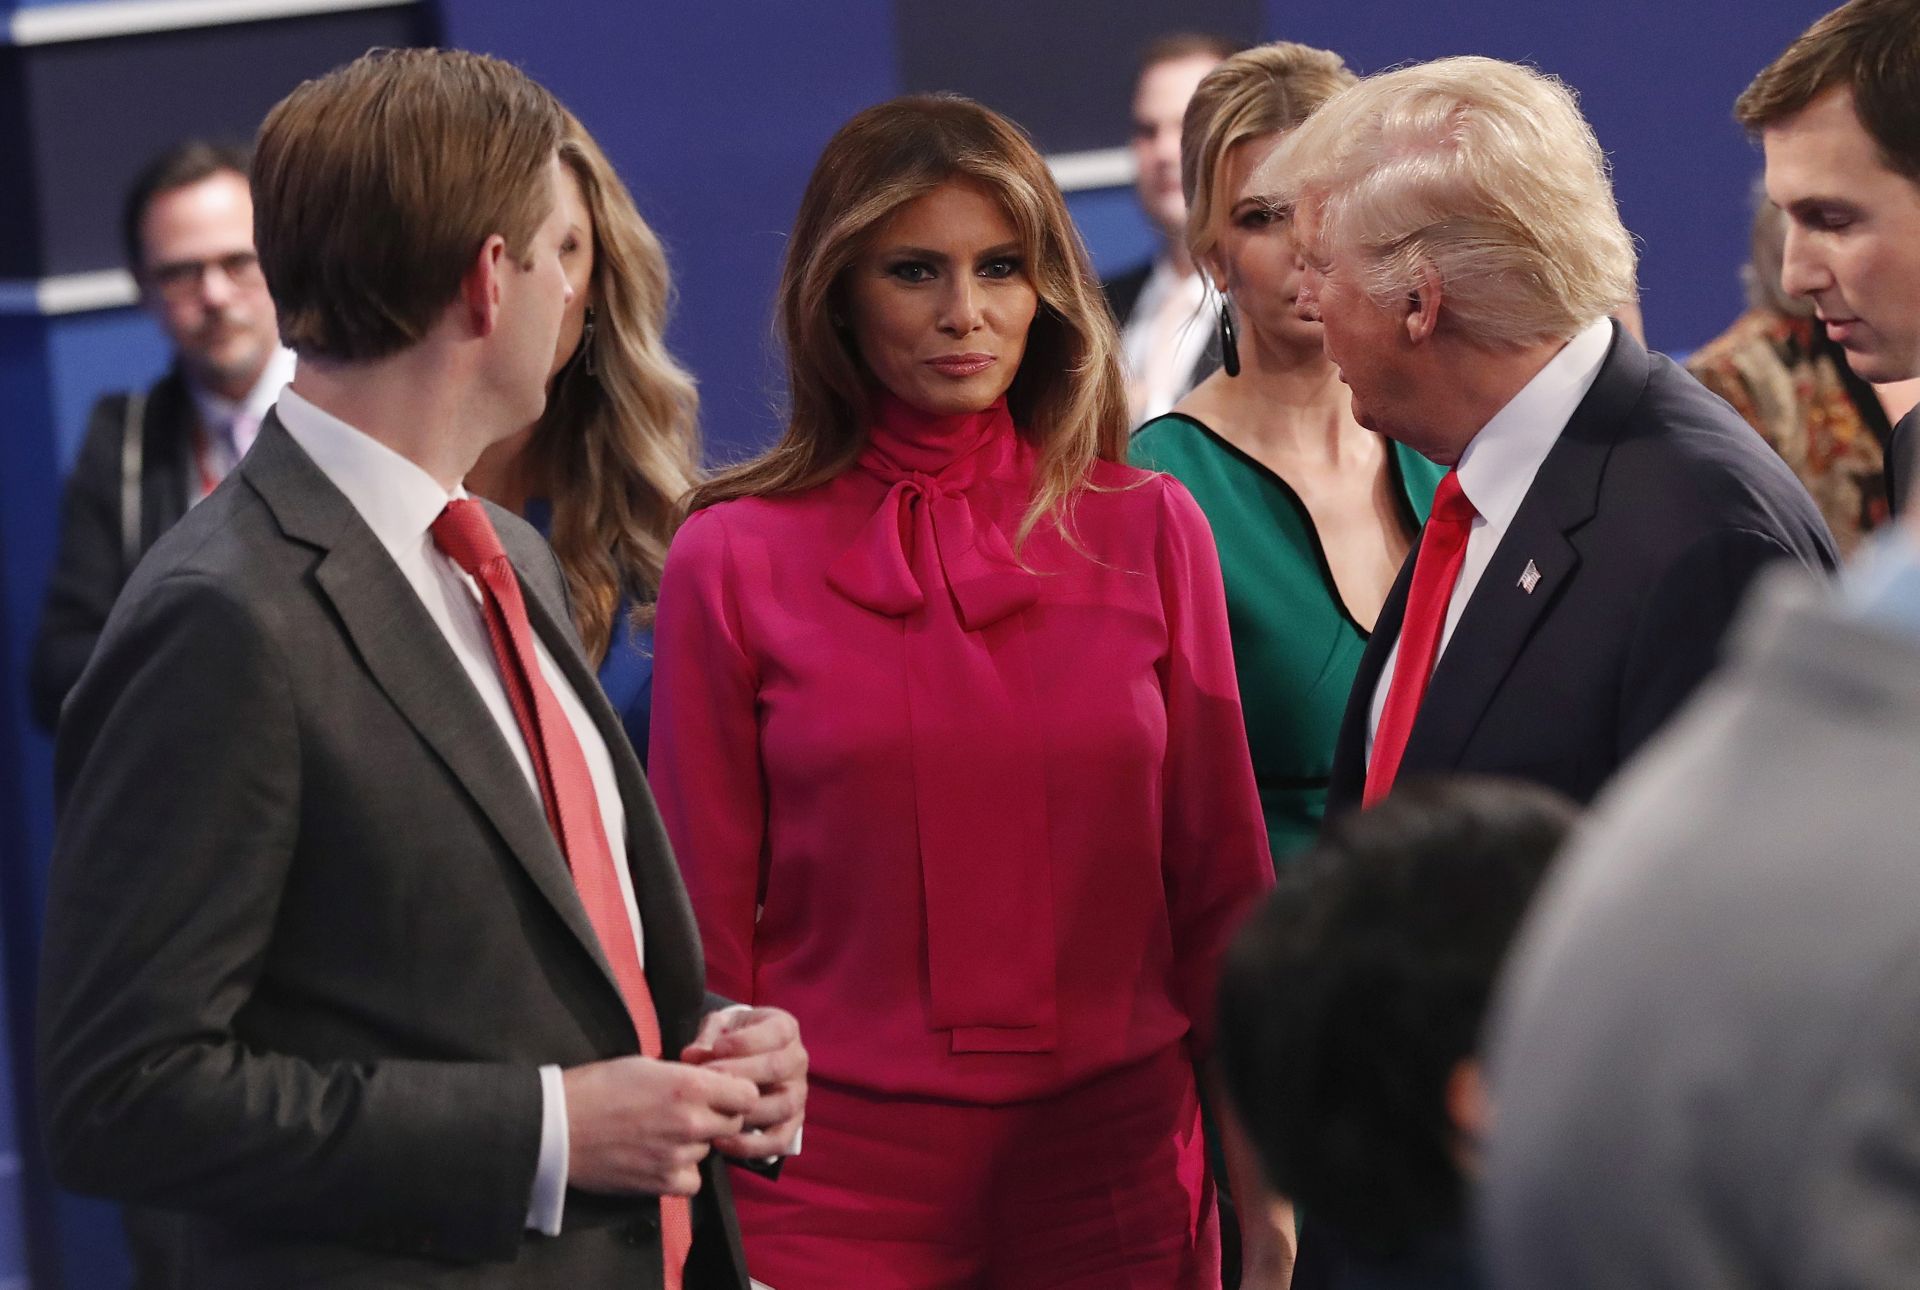 epa05579147 Republican Donald Trump (R) and wife Melania at the end of the second Presidential Debate at Washington University in St. Louis, Missouri, USA, 09 October 2016. The third and final debate will be held 19 October in Nevada.  EPA/RICK T. WILKING